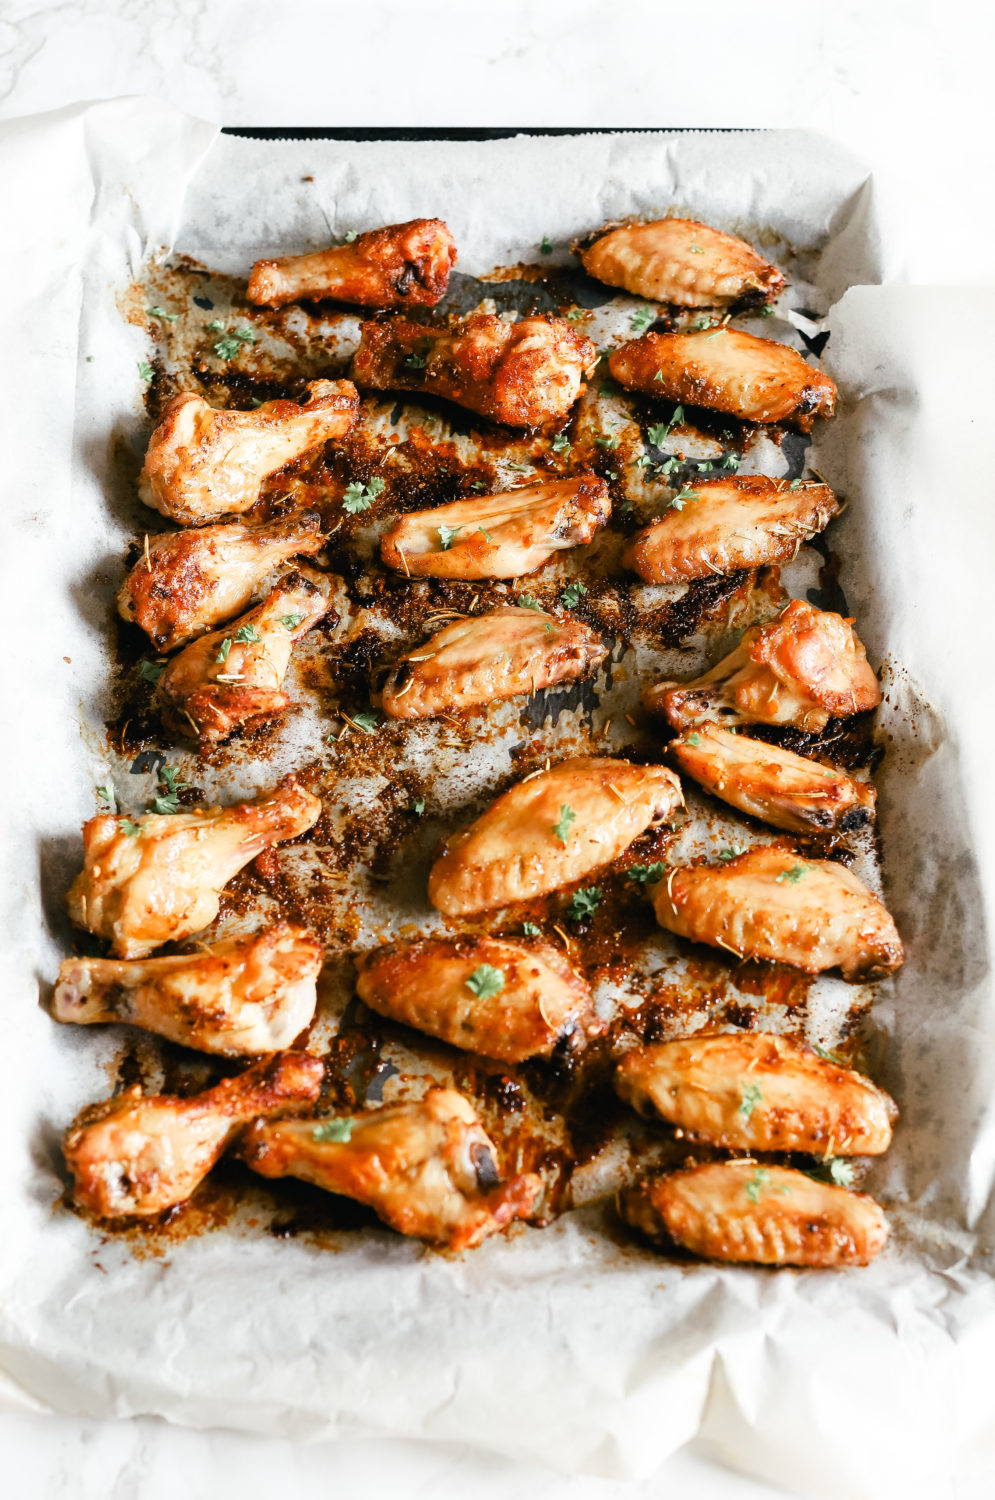 Low carb and full of flavour! An easy chicken wing dinner recipe to make, just pair your wings with your favourite side dish and dip and enjoy! Dry Rub Chicken Wings | Dry Rub Seasoning | Dry Rubbed | Keto | Ketogenic | Oven Baked Chicken Wings | Naked Chicken Wing Recipe | Not Breaded | No Breading | Gluten-Free | Paleo | Whole 30 | Game Night | Crispy | Chicken Seasoning | Poultry Seasoning | Family Dinner | 